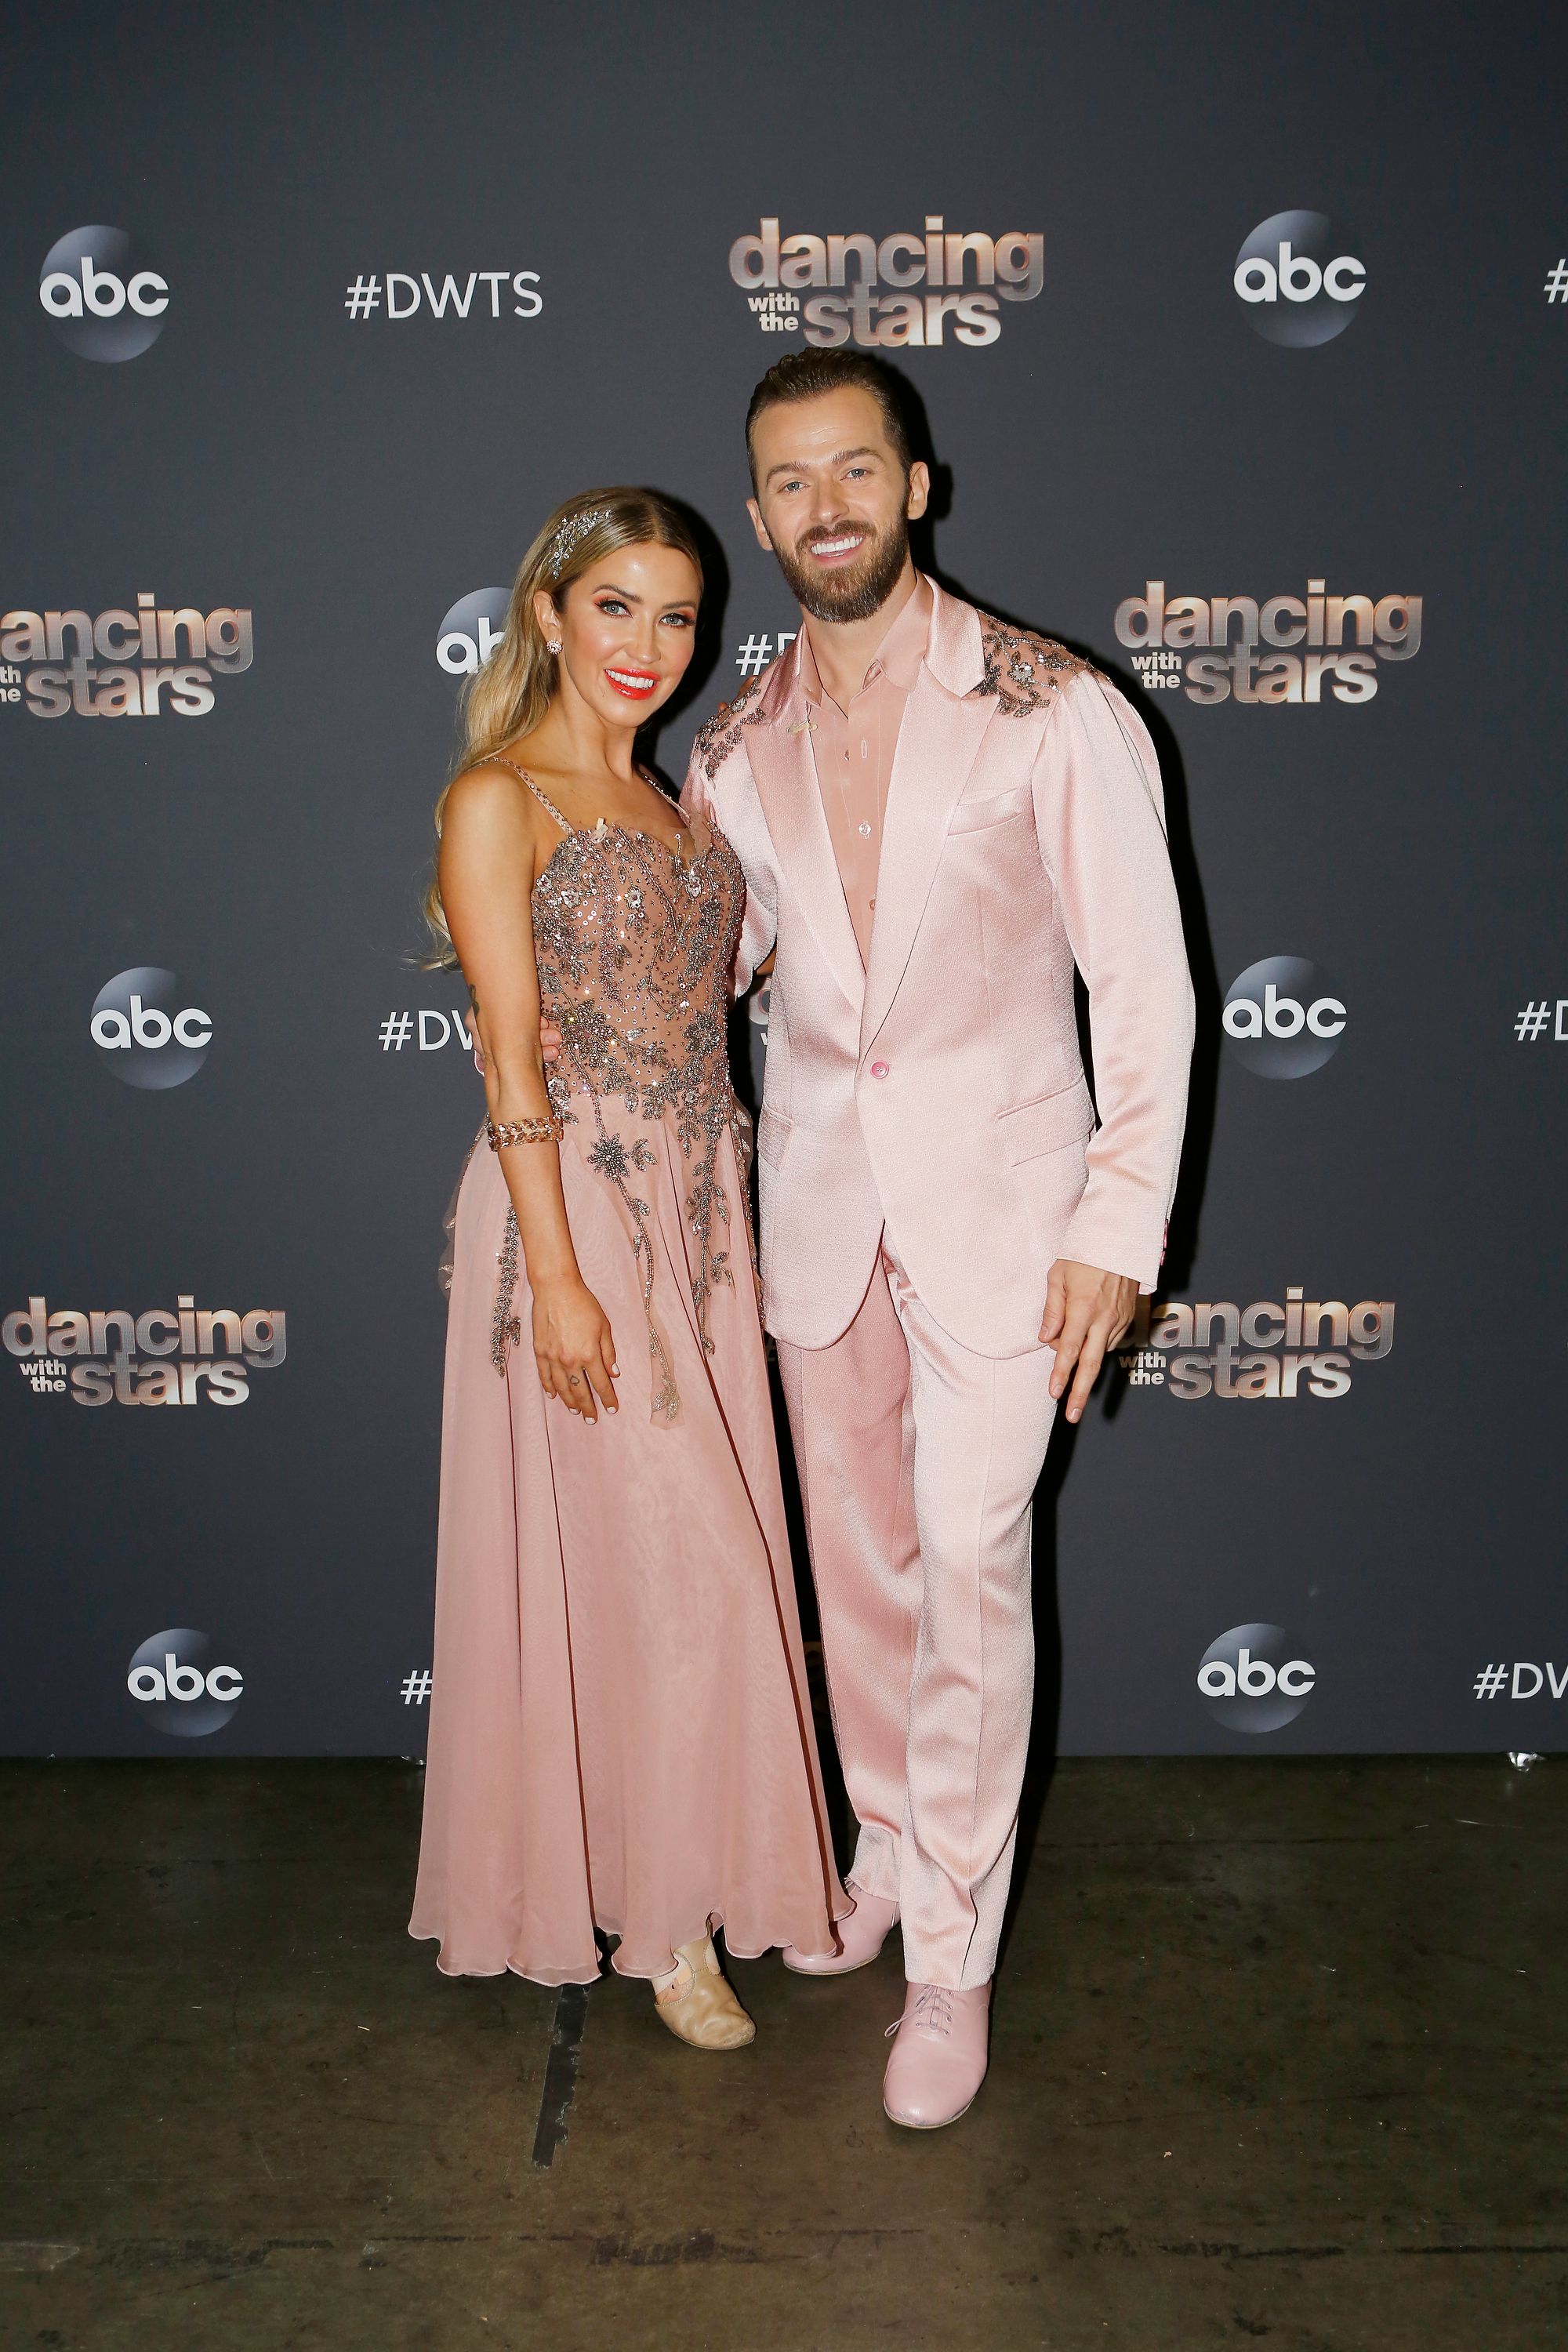 Kaitlyn Bristowe and Artem Chigvintsev at ABC's "Dancing With the Stars" - Season 29 - Week Two on September 22, 2020 | Photo: Getty Images